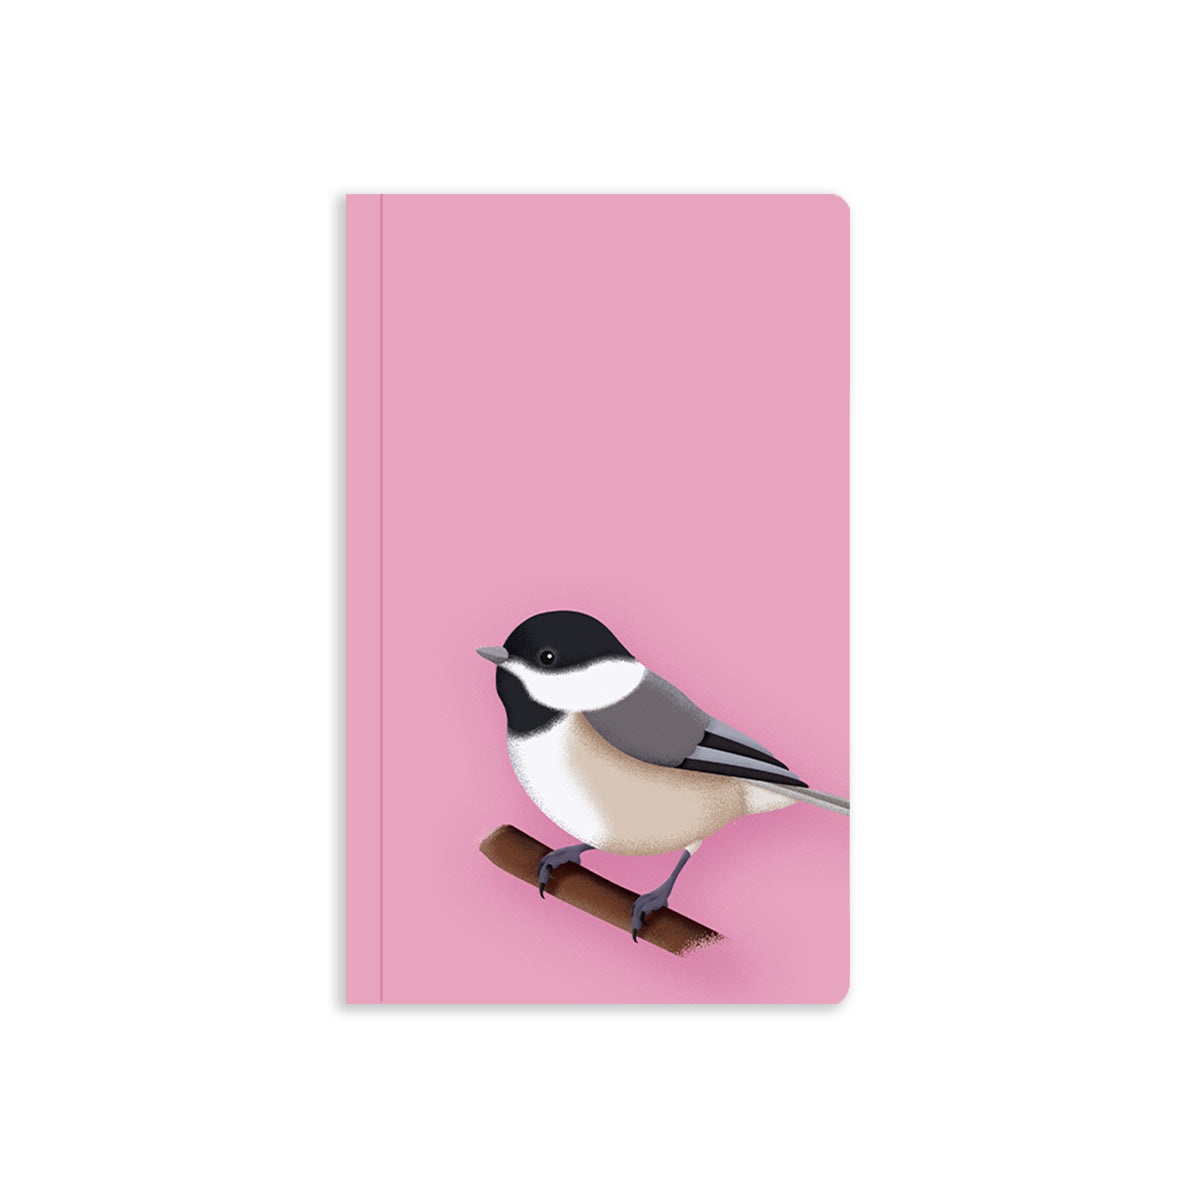 Illustrated chickadee on a pink background